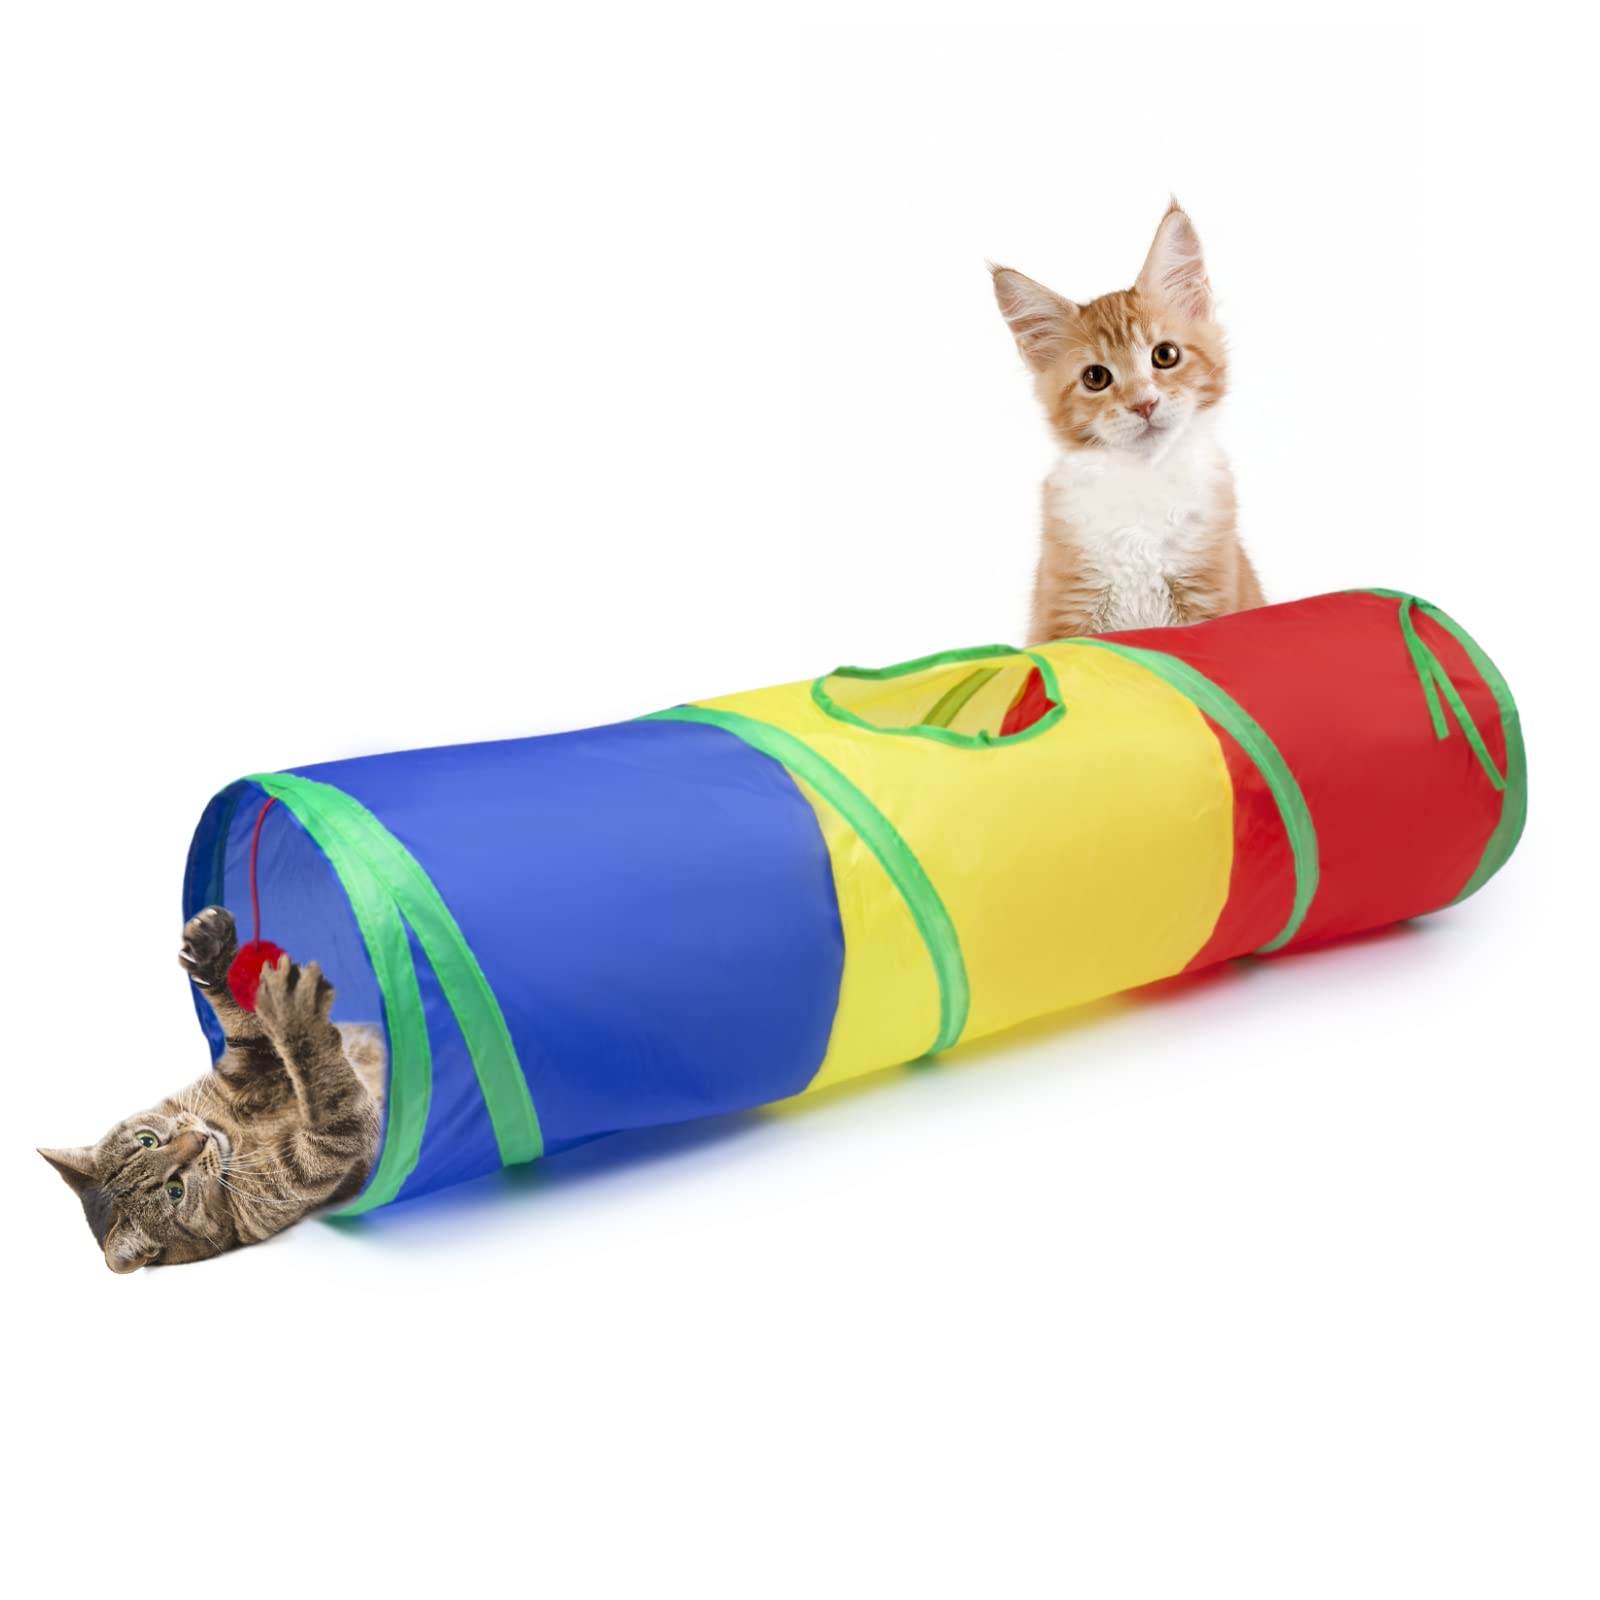 Sheldamy Cat Tunnel, 2-Way Cat Tunnels For Indoor Cats, Collapsible Cat Play Tunnel, Interactive Toy Maze Cat House With 1 Play